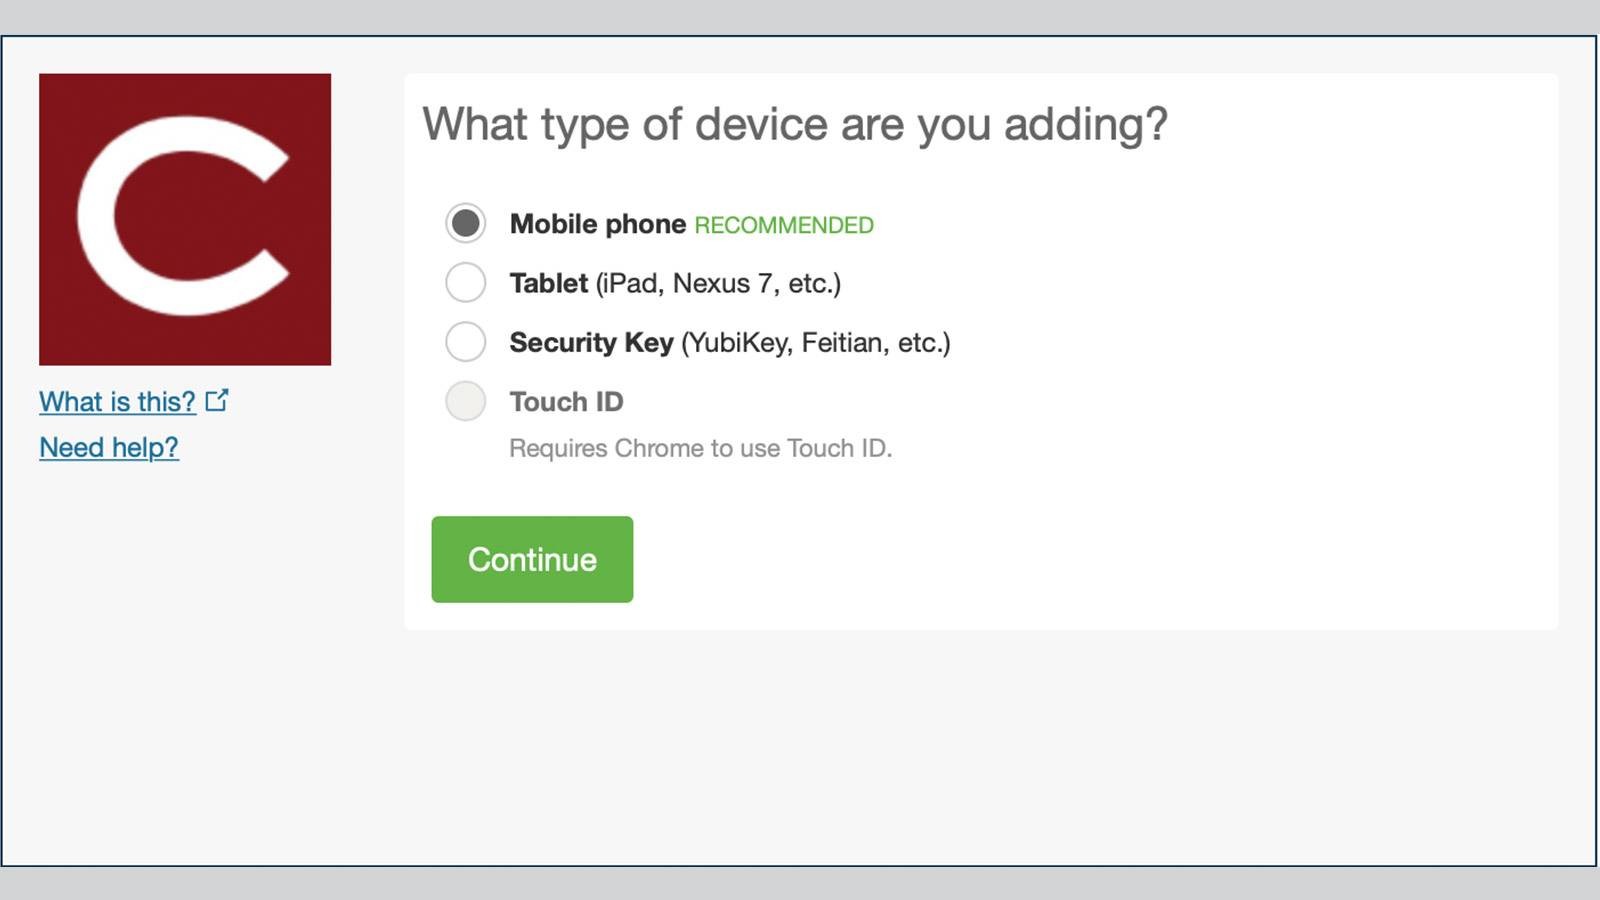 "Mobile Phone" chosen from radio buttons